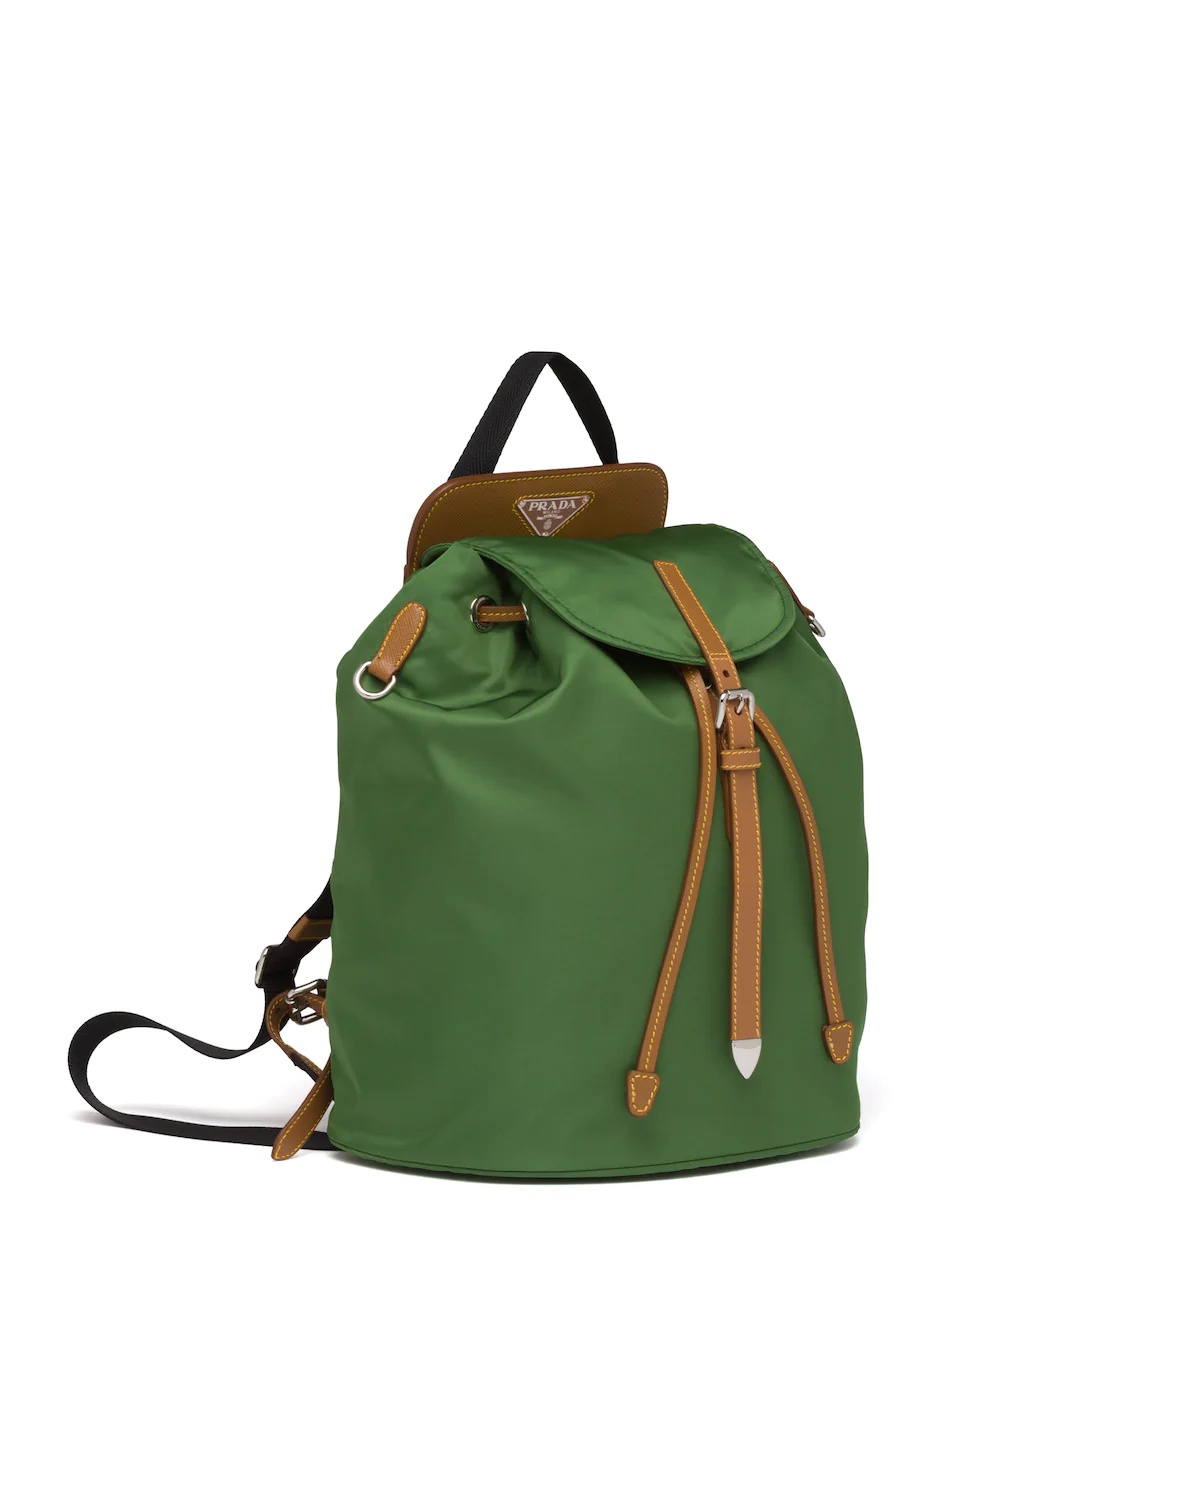 Nylon and Saffiano leather backpack - 3